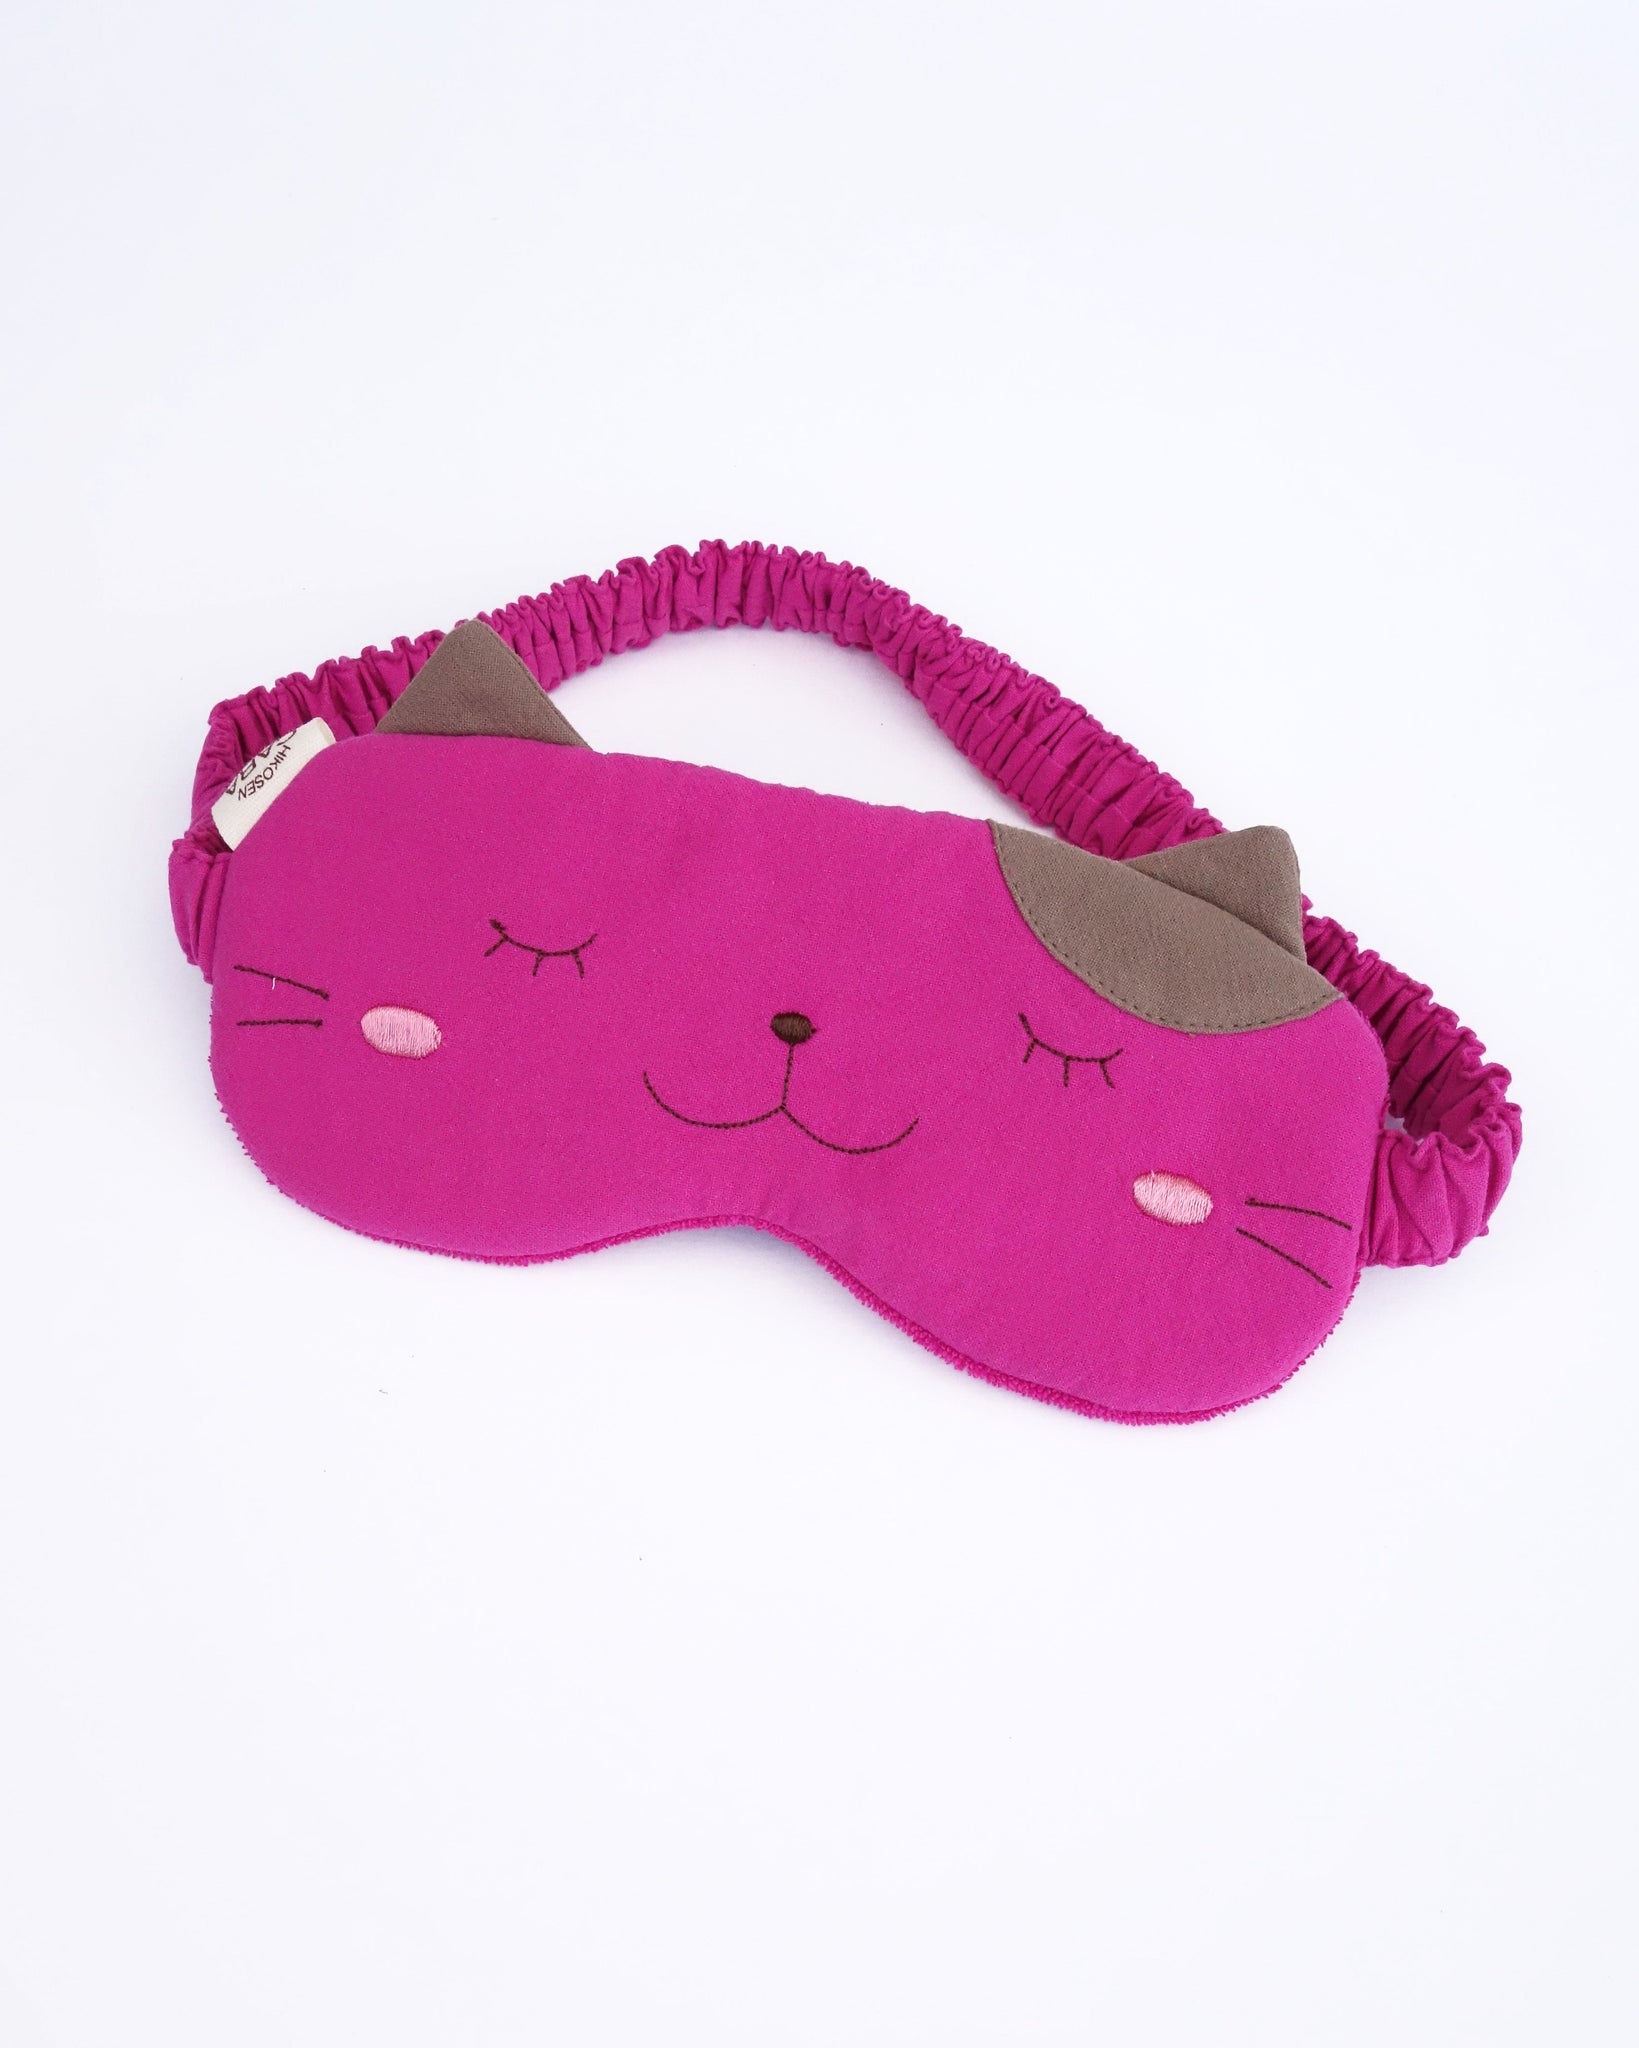 Eye mask in fushsia color with appliqué, embroidery, 3D cat ears, elastic strap, foam-padding,  in front view.